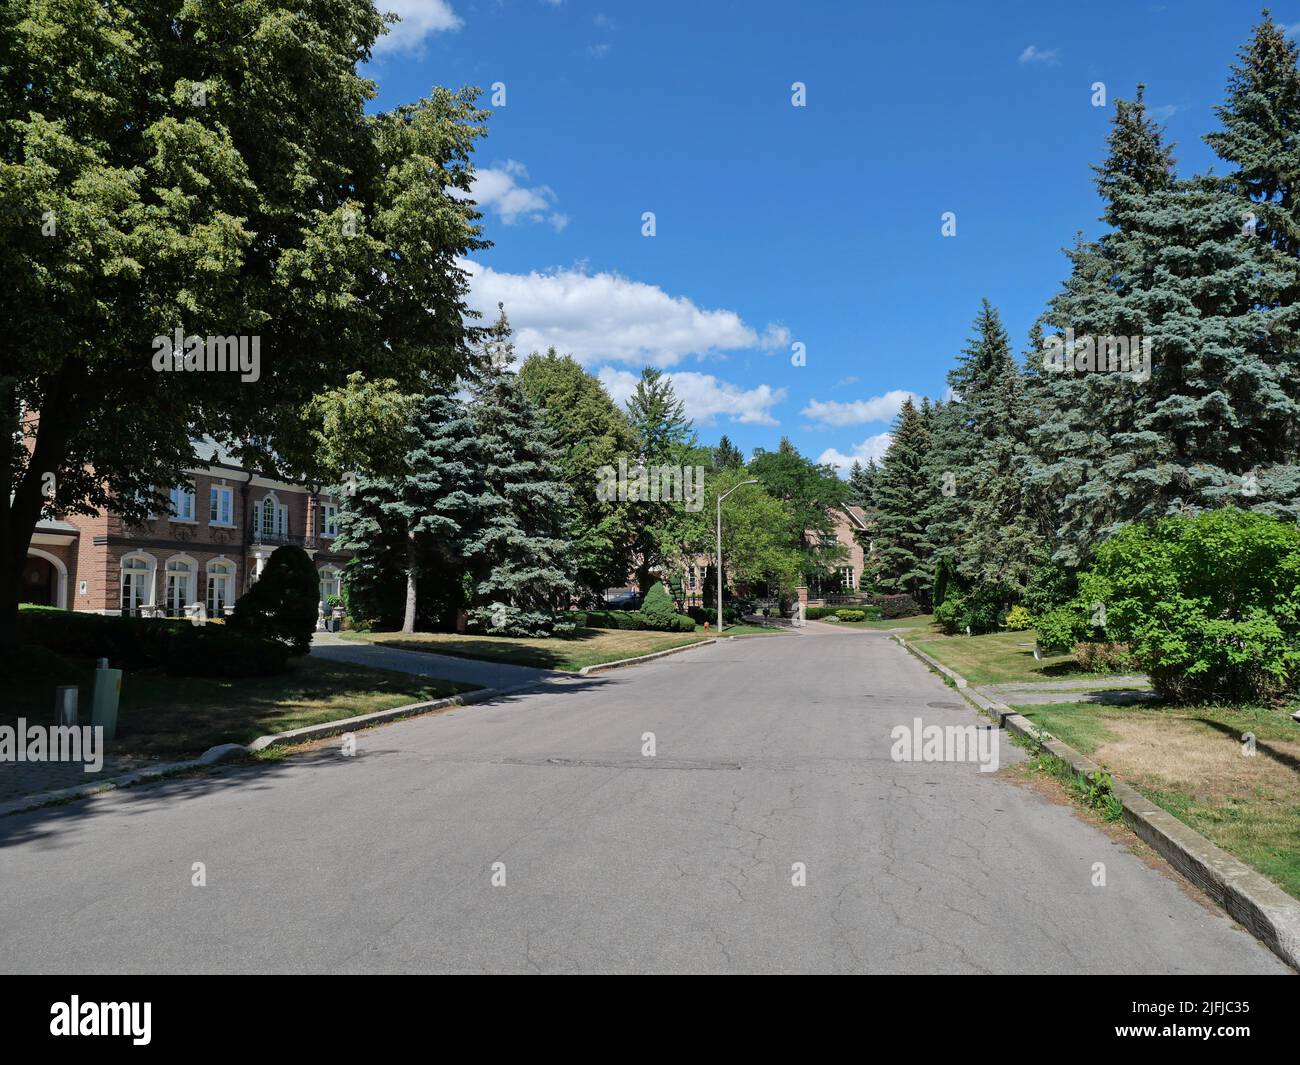 Suburban residential street of large traditional detached houses, lined with trees Stock Photo